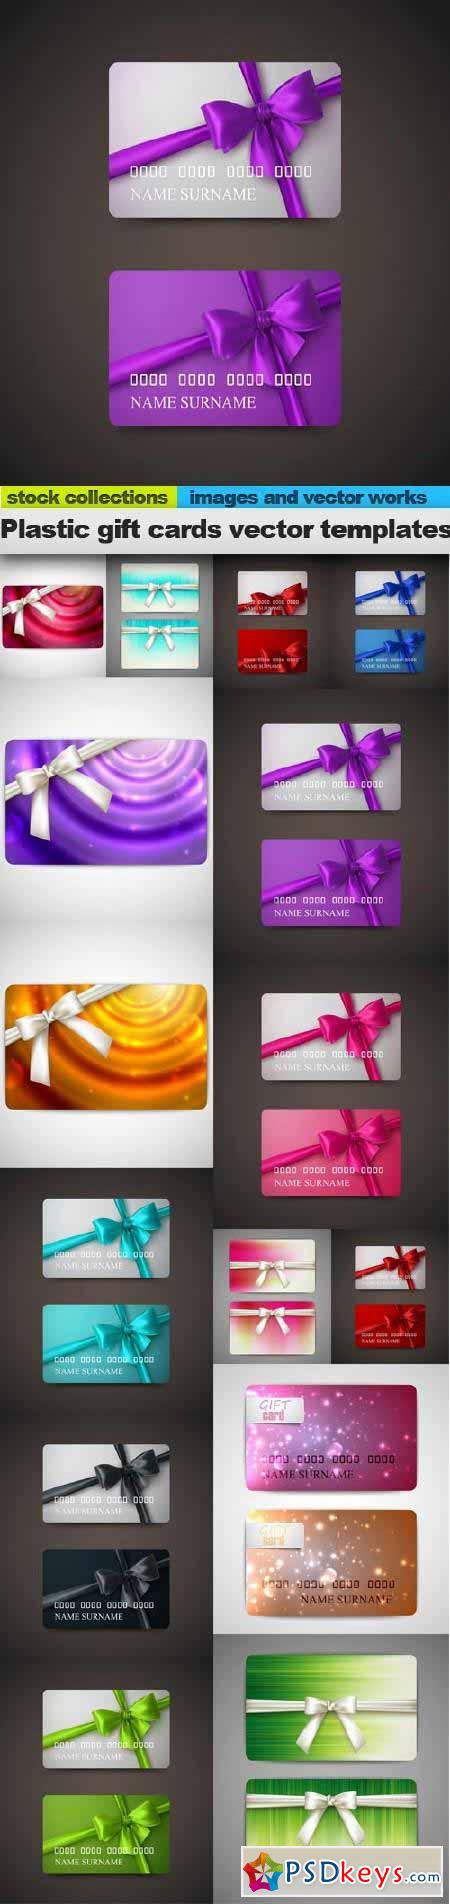 Plastic gift cards vector templates, 15 x EPS